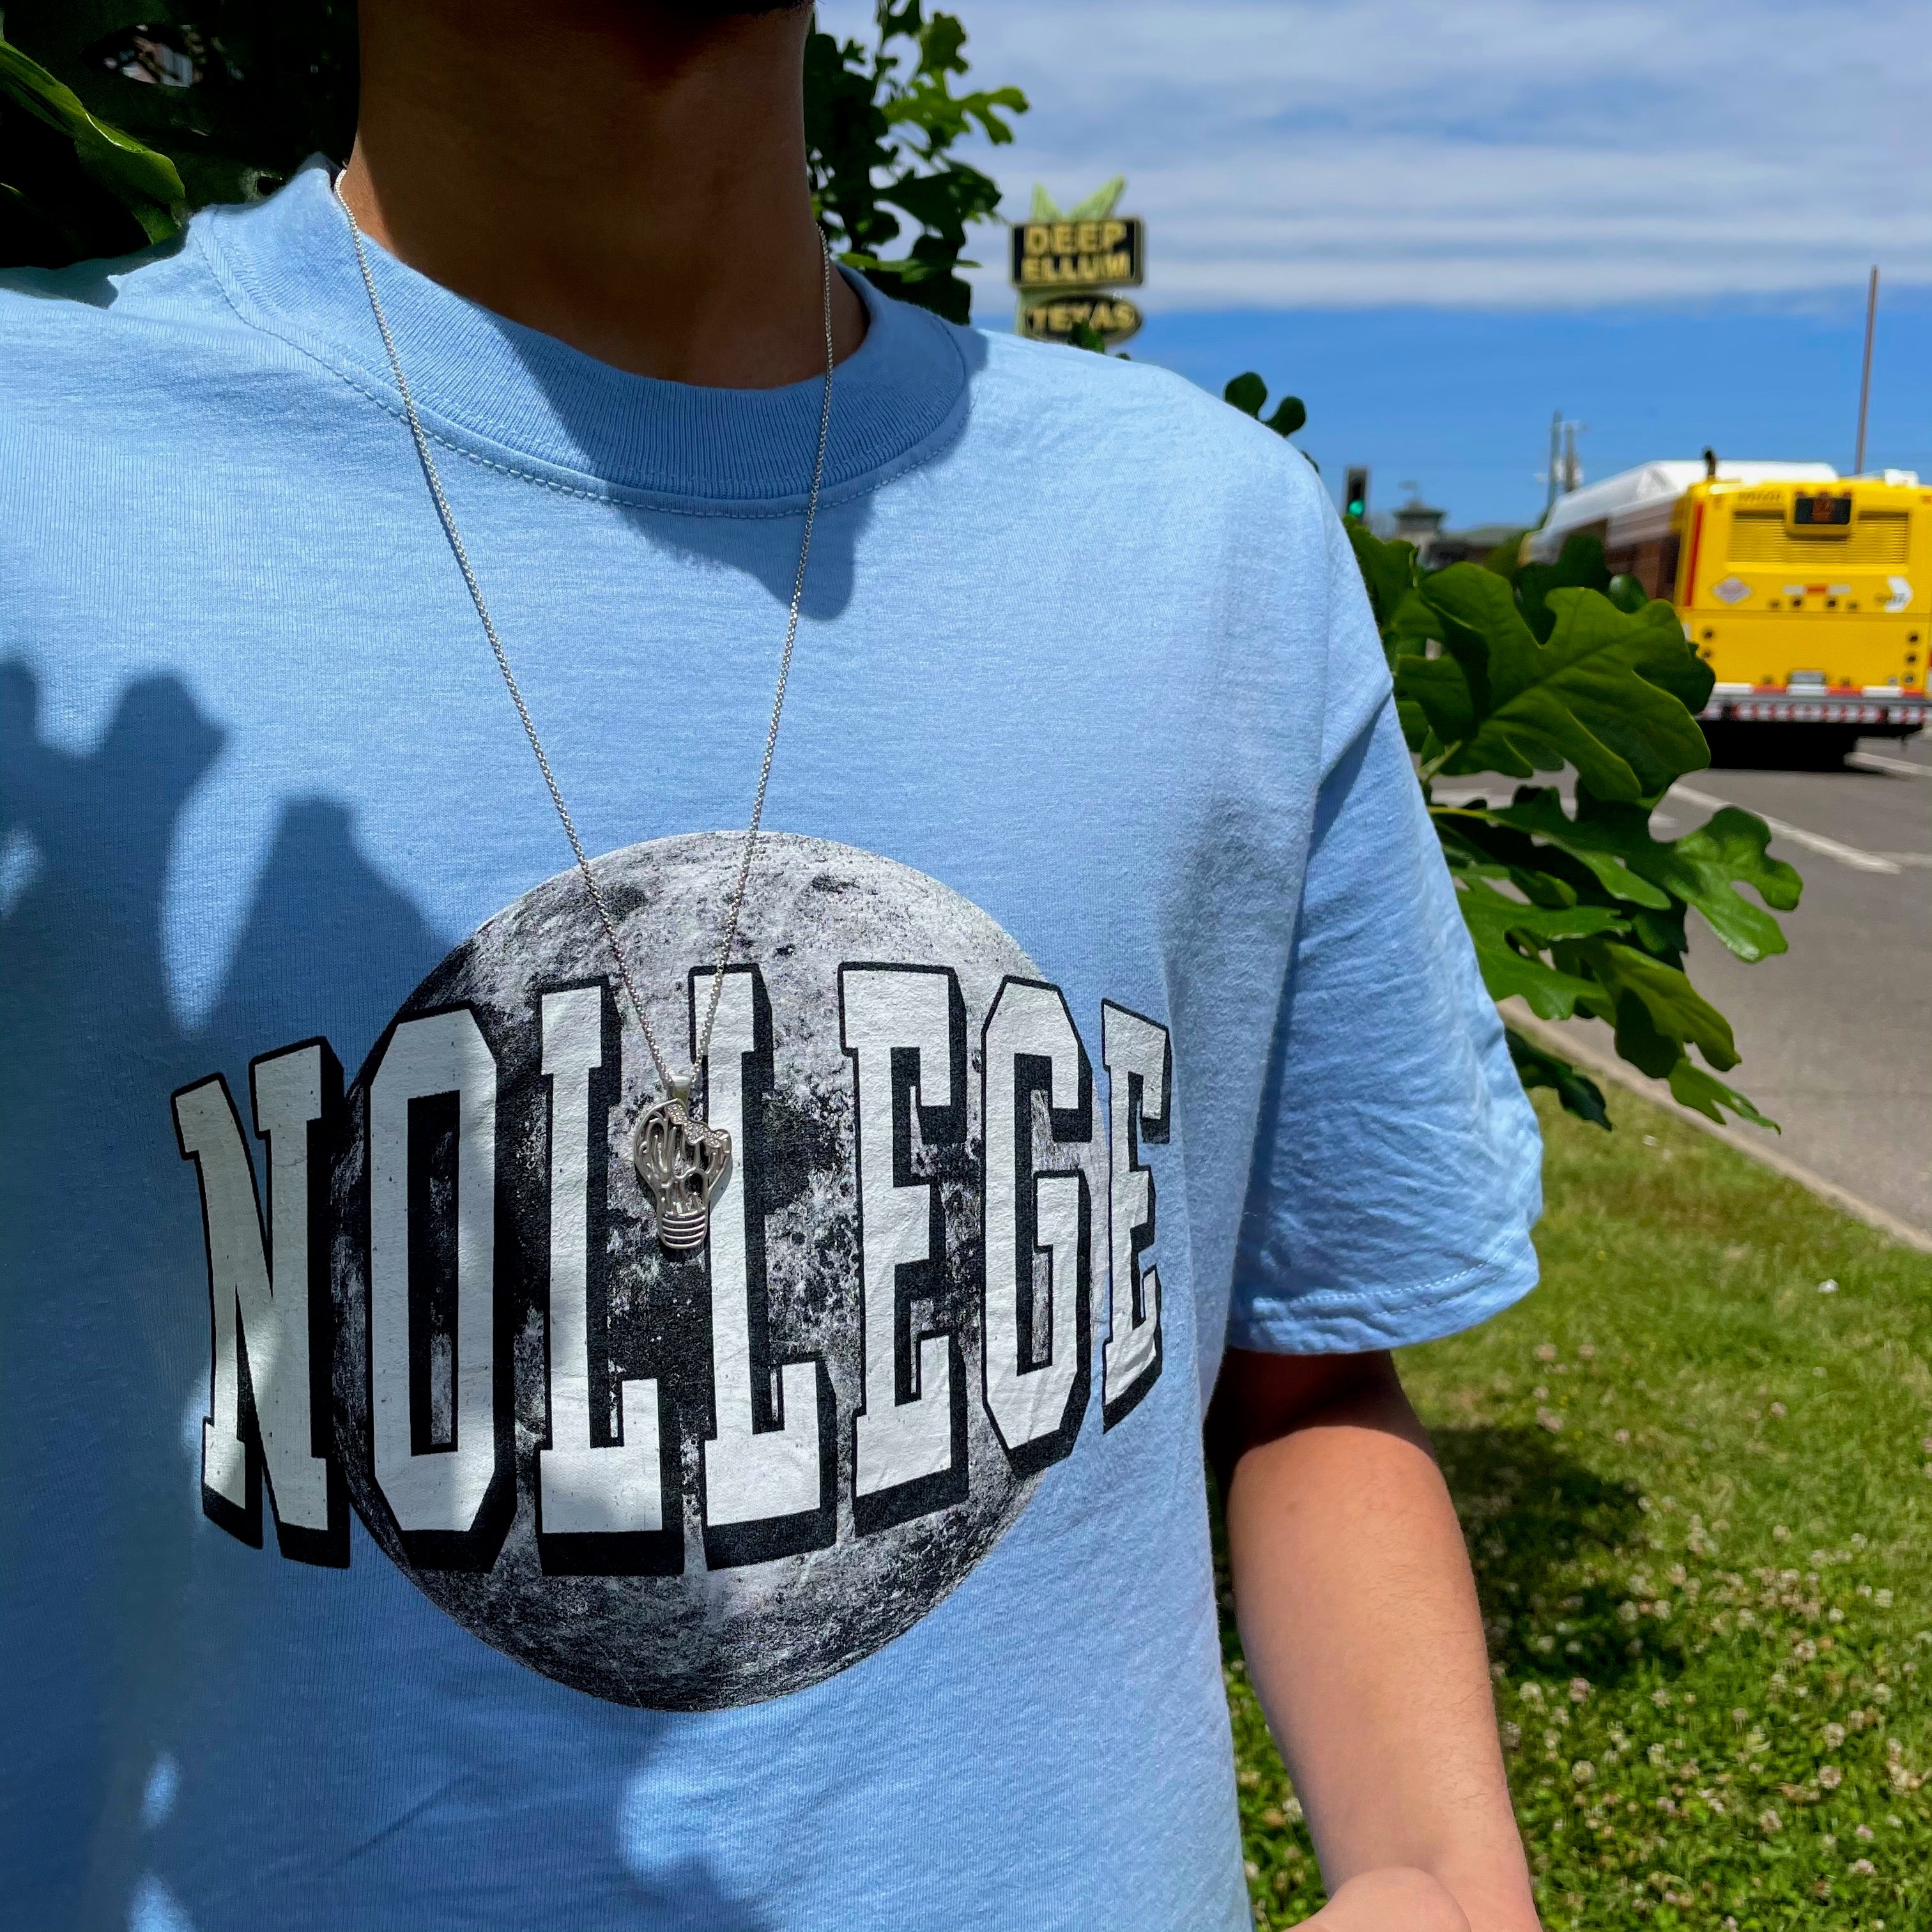 Nollege Earth Day Tee Blue